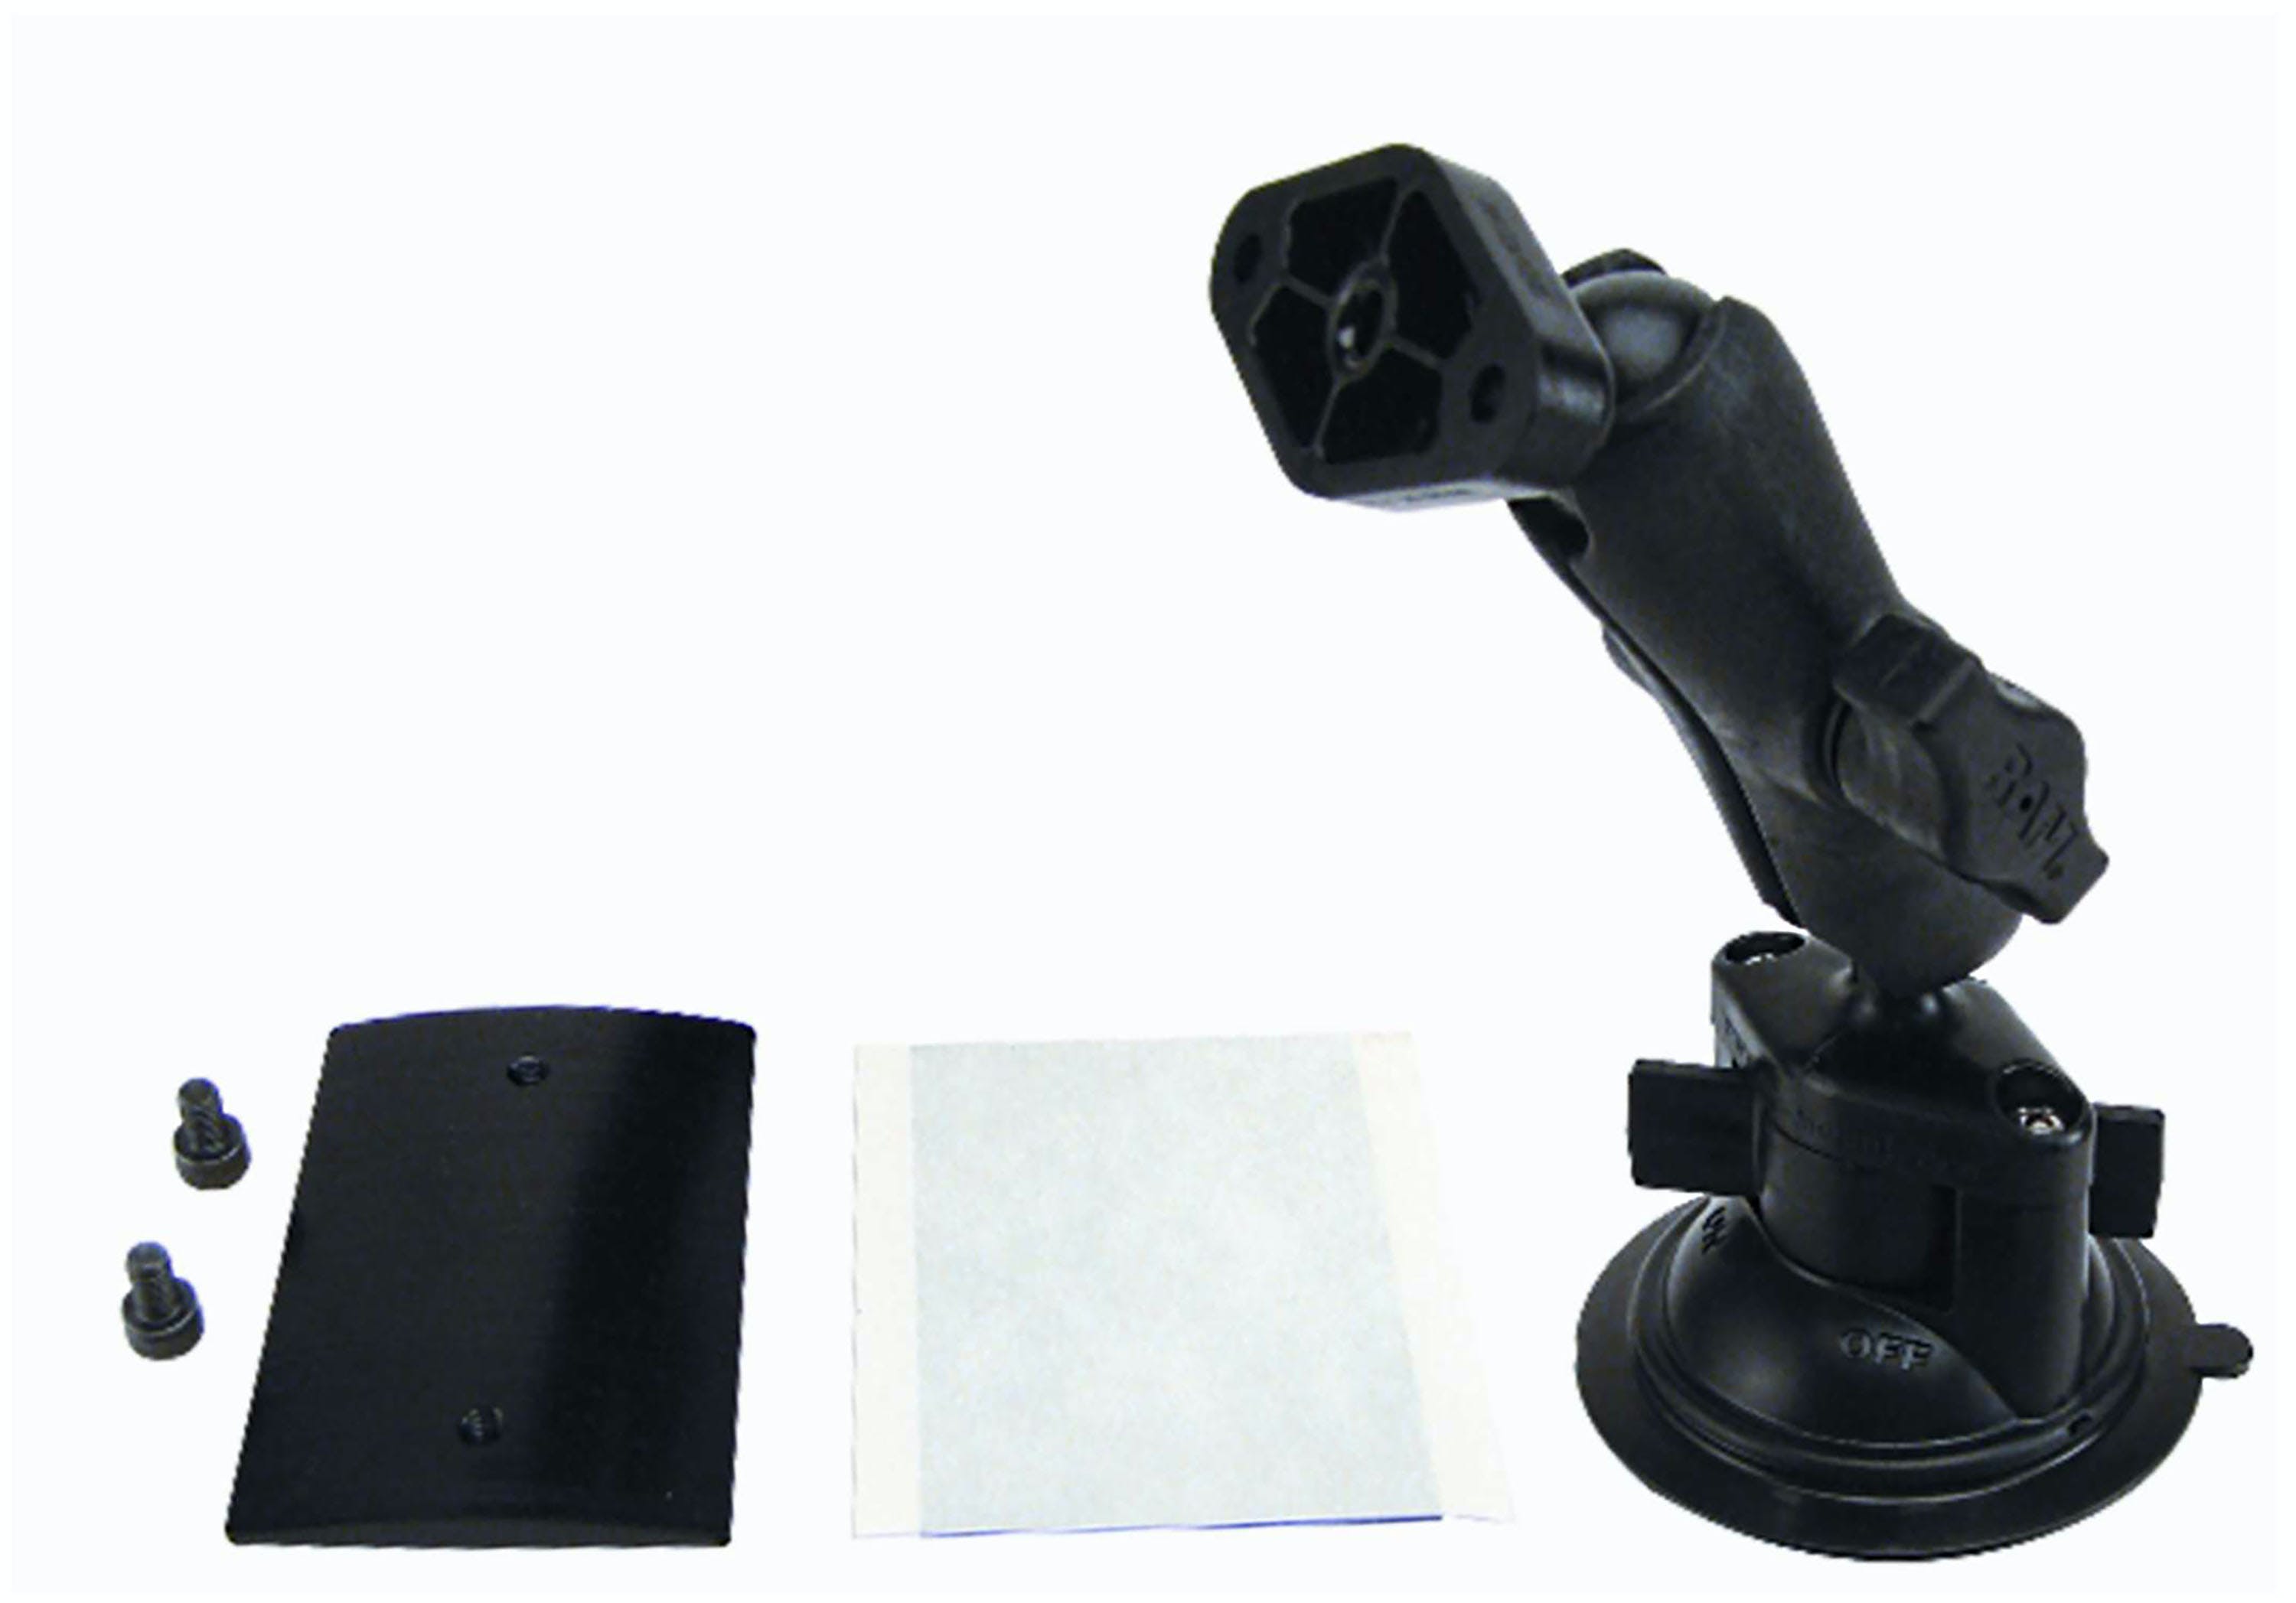 FAST - Fuel Air Spark Technology 170493 A/F Meter Suction Cup Mount Kit